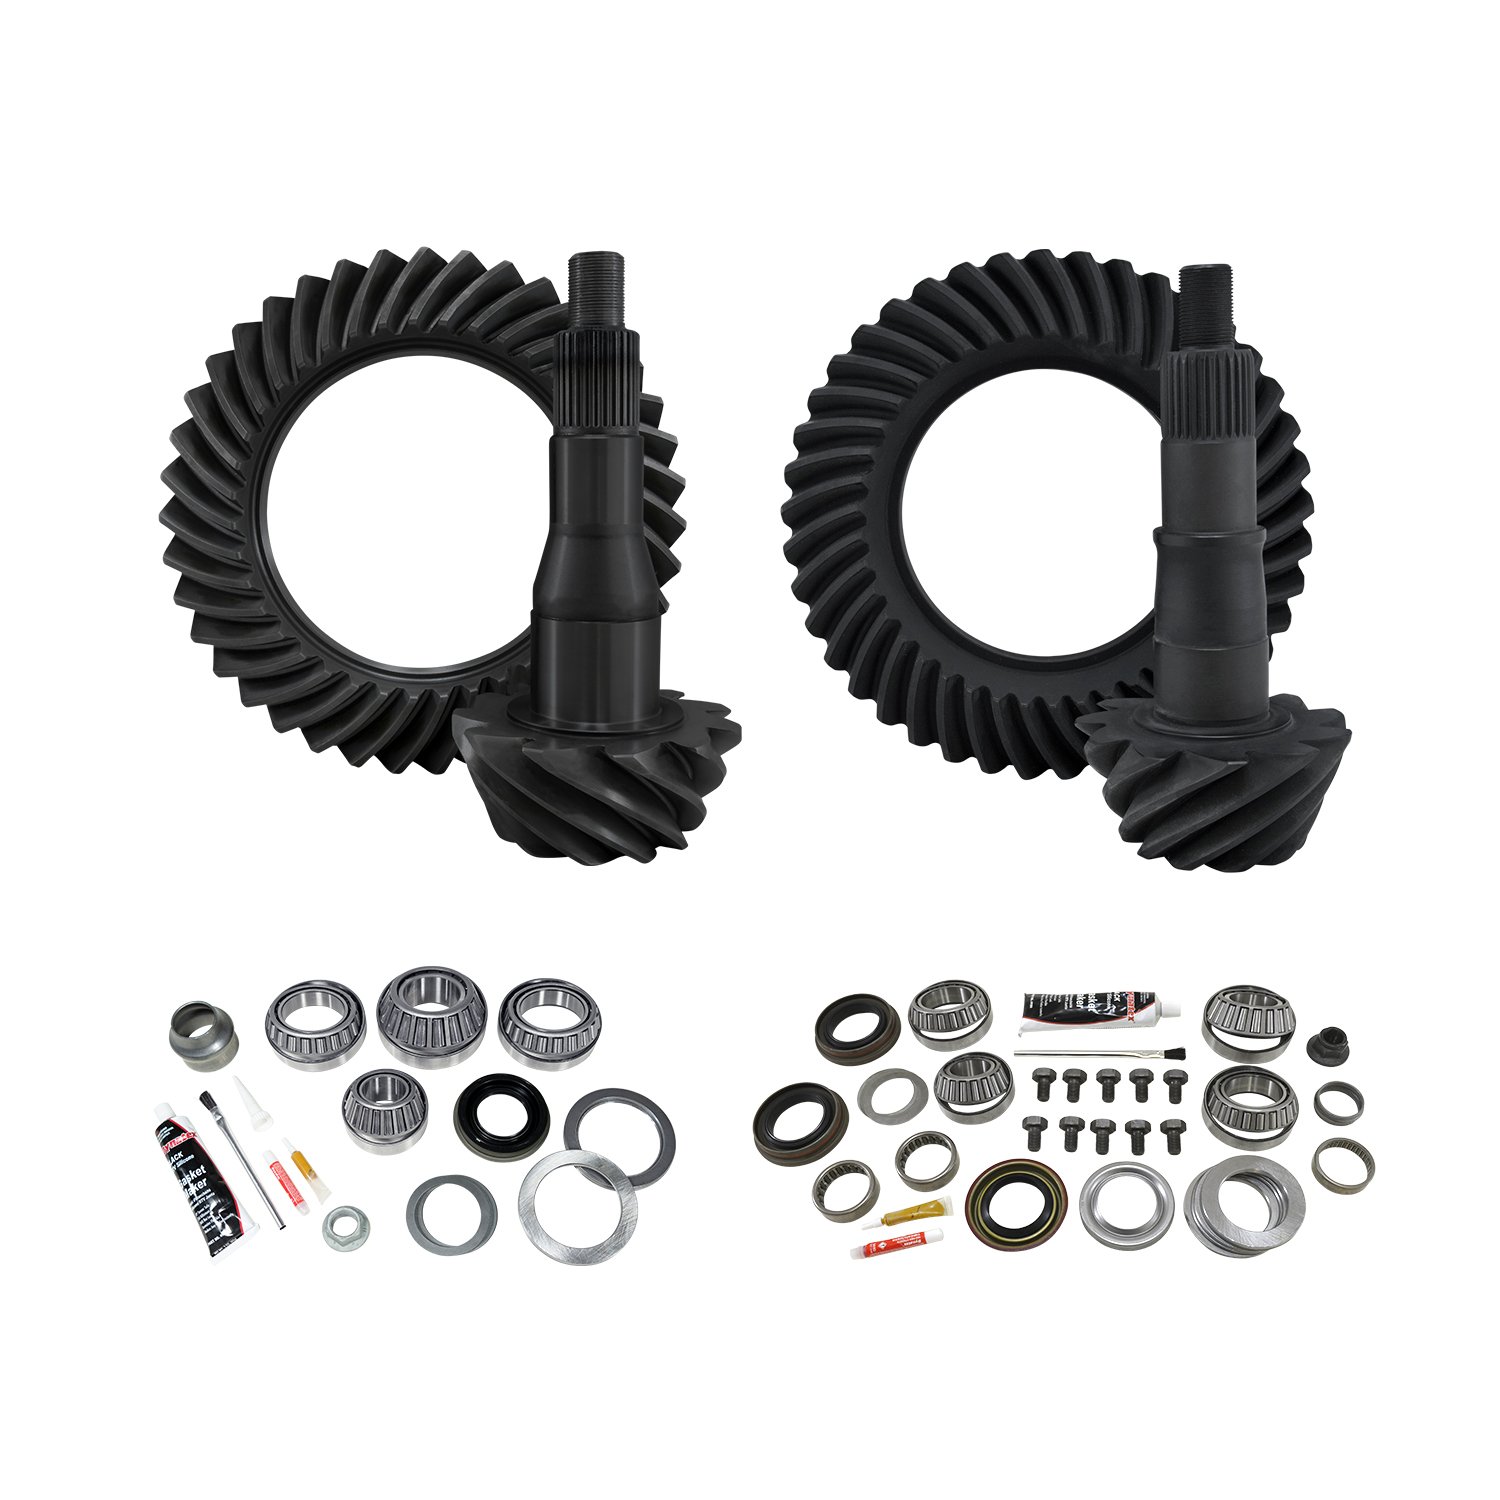 Re-Gear & Installation Kit, Ford 9.75 in., Various F150, 3.73 Ratio, Fr&Rr